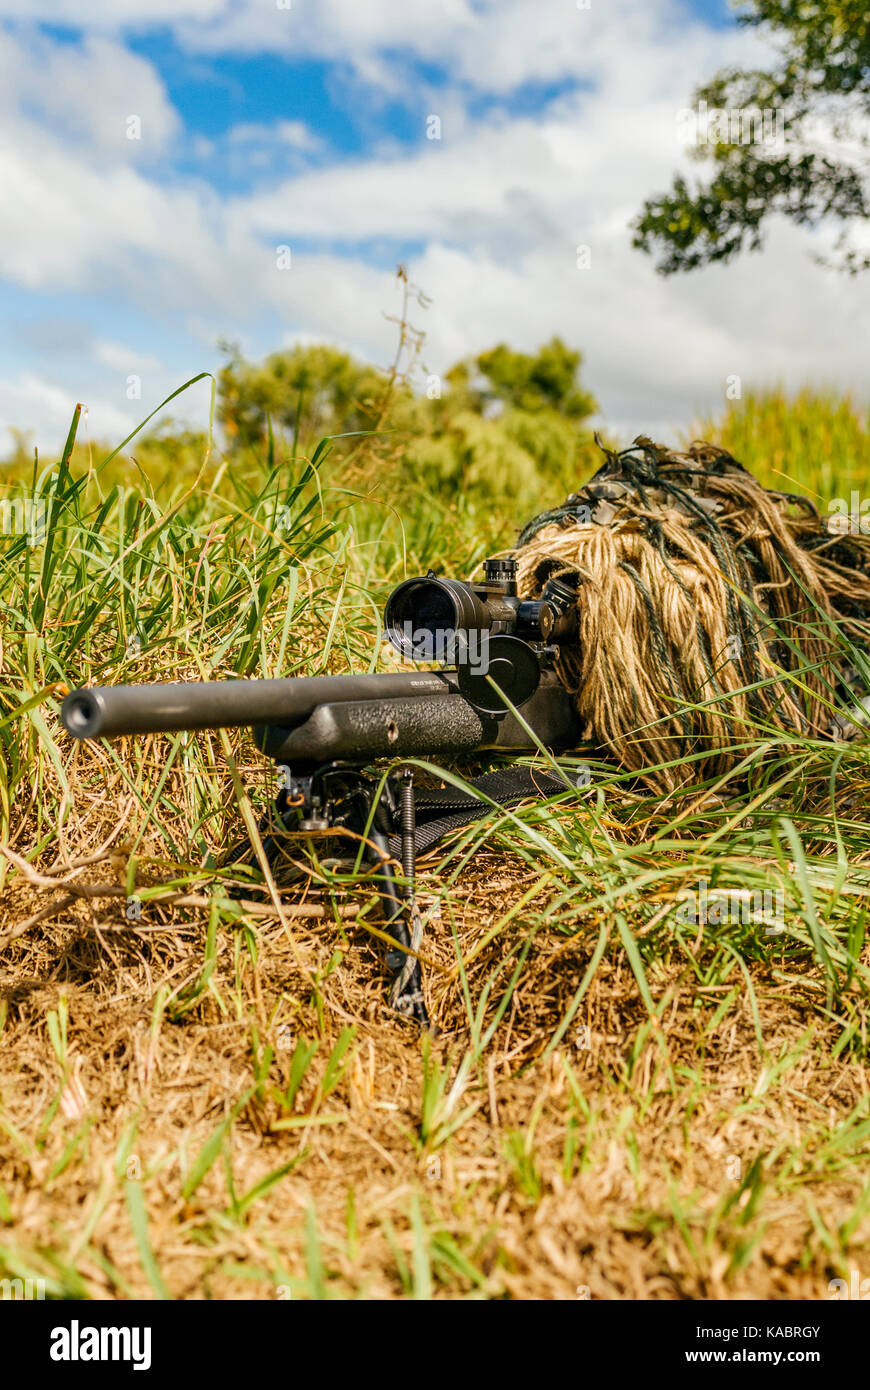 Police SWAT sniper in a ghillie suit looking through a rifle scope surrounded by dense vegetation during a police training exercise in the USA. Stock Photo